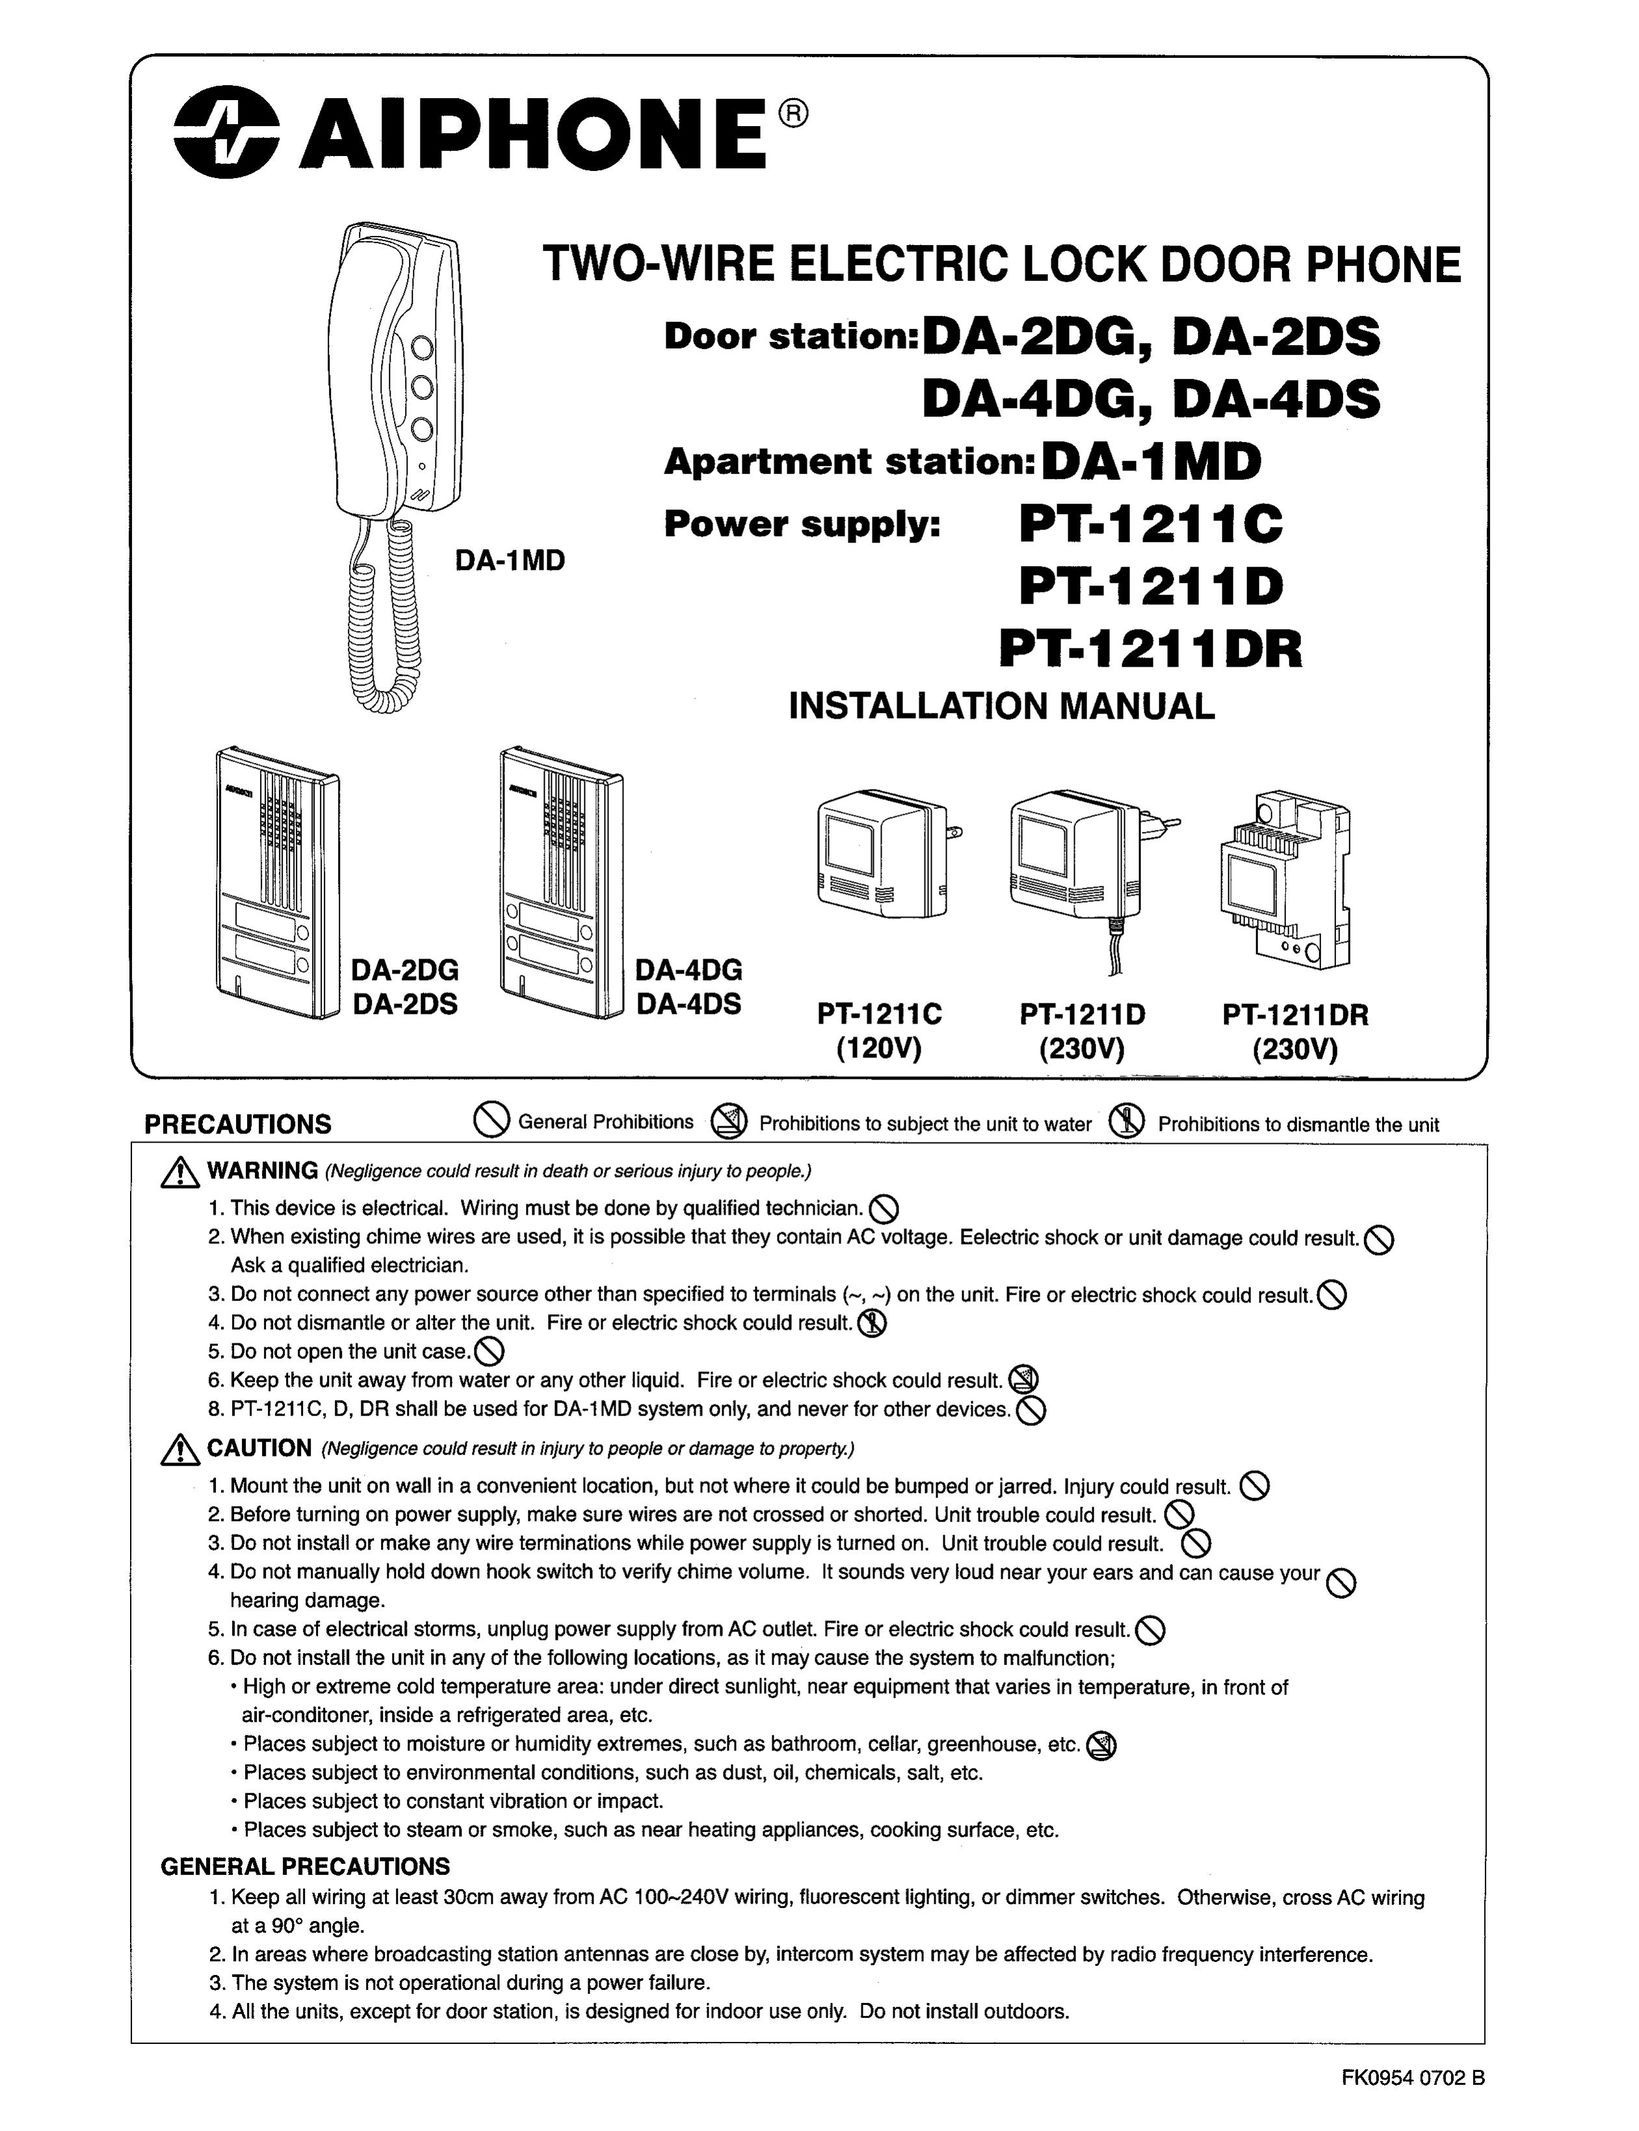 Aiphone DA-1MD Home Security System User Manual